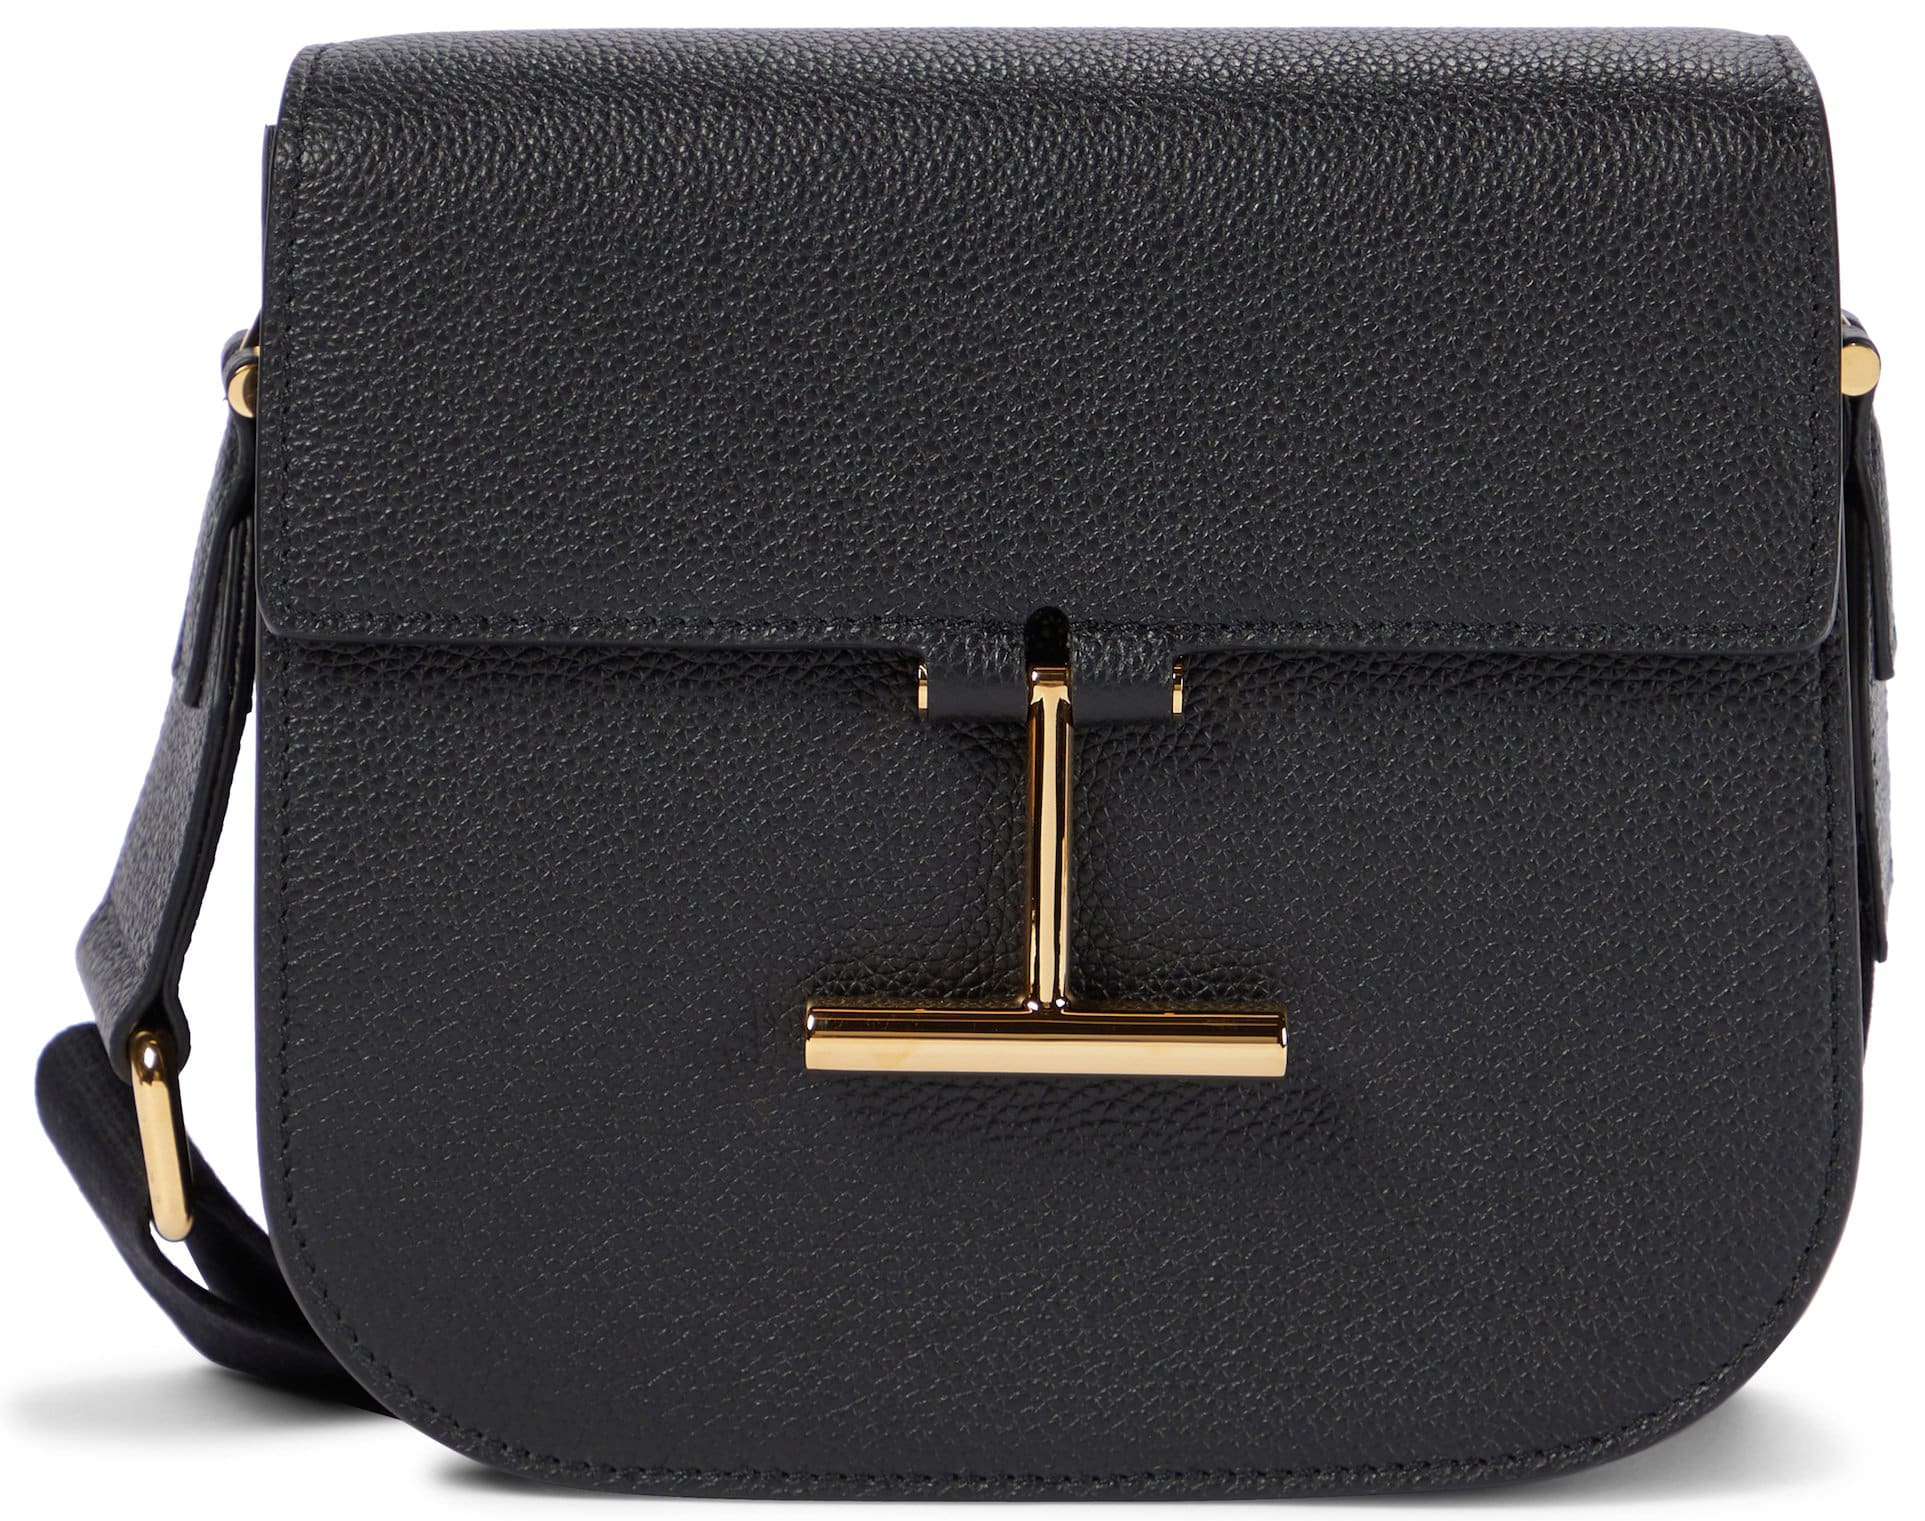 Compact yet practical, the Tara mini crossbody bag is made in Italy from black grained calf leather and is shaped with a flap top, finished with the designer's T-monogram hardware